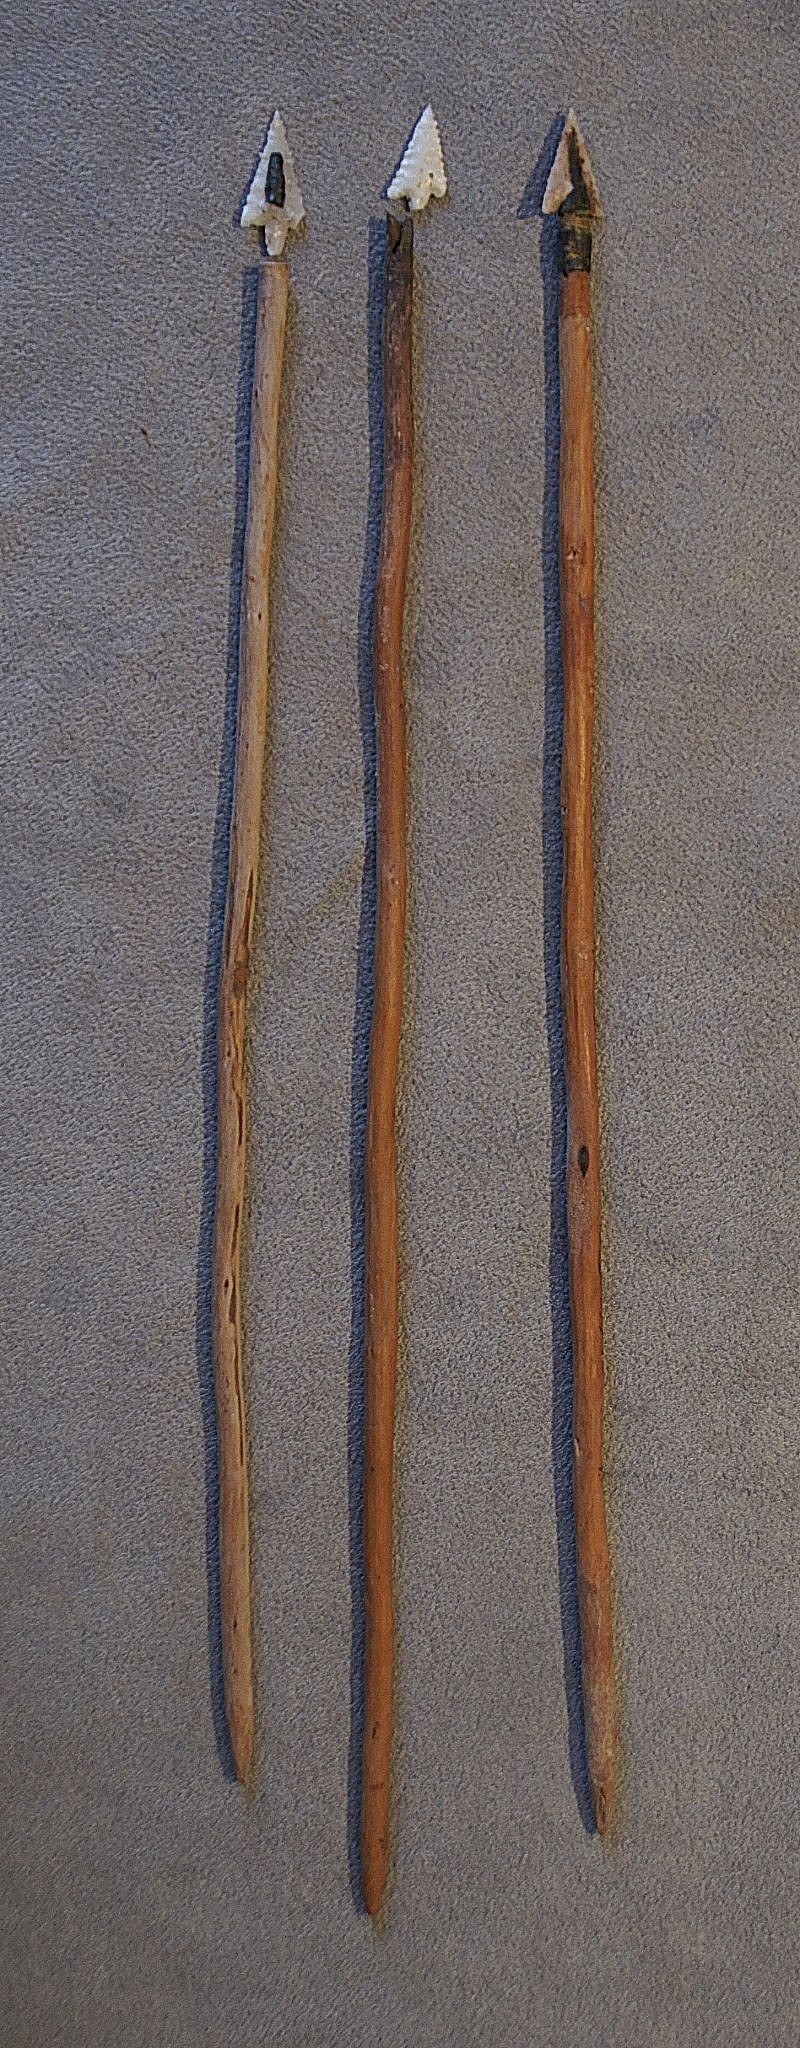 Chile, Three Arrows with Wood Shafts and Napped Quartz Points
These long, tapered arrows had small points for hunting birds and small fish.  The points were inserted into a socket, then tied and glued to the shafts with black tree resin.
Media: Wood
Dimensions: Length: 10"
n6031